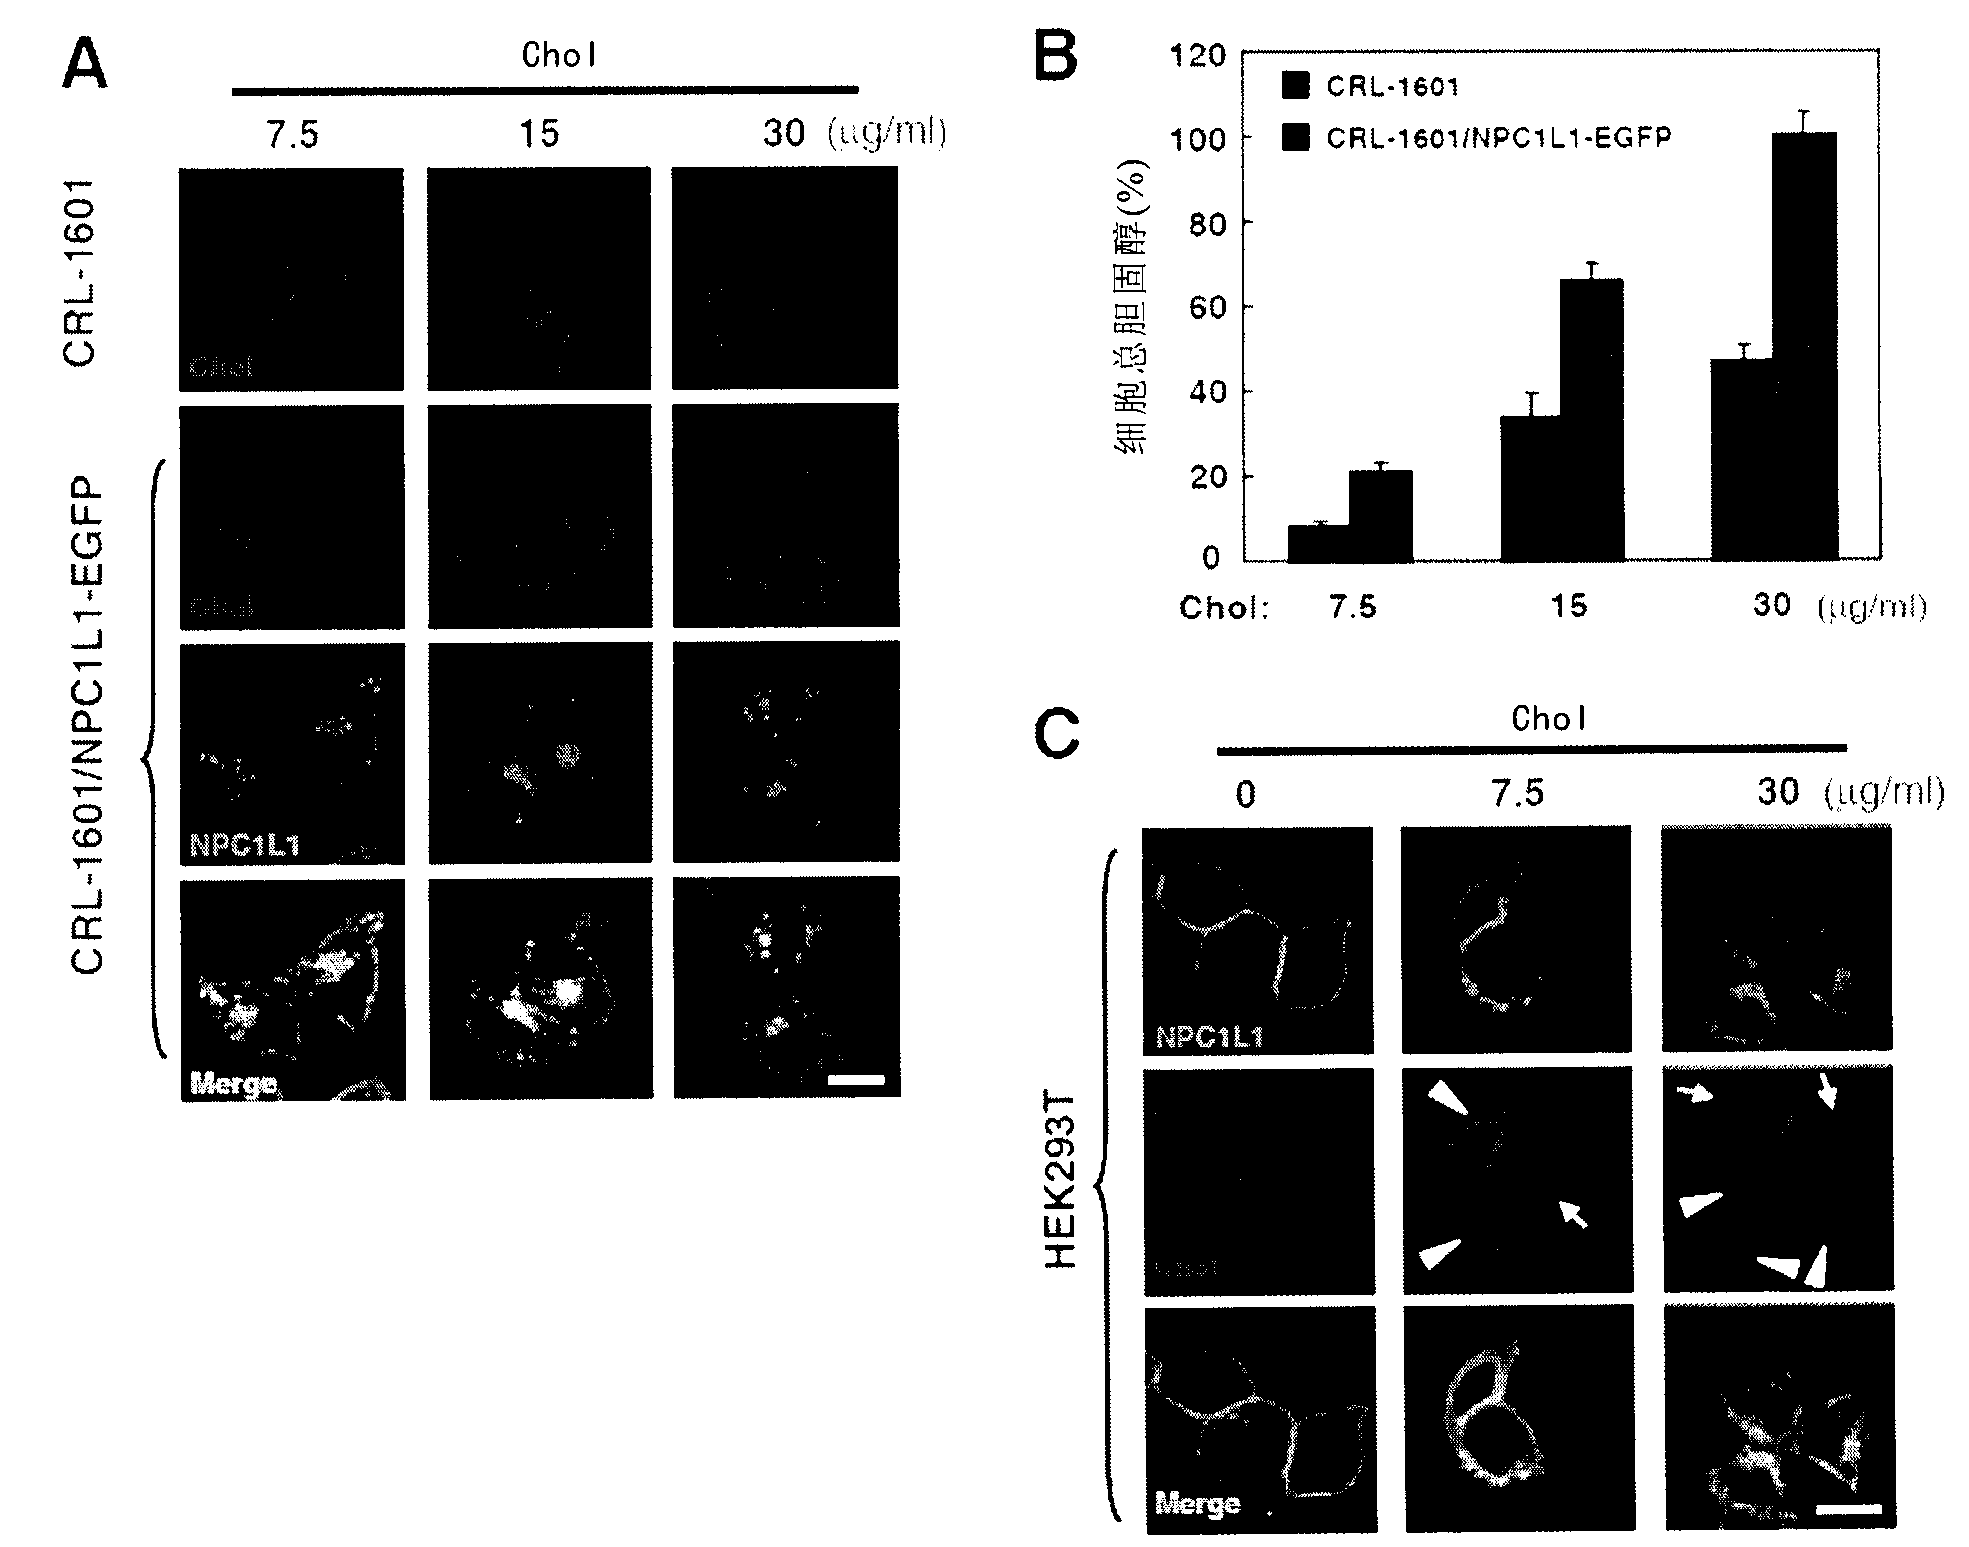 Method for screening new drug for lowering cholesterol based on analysis of change of NPC1L1 protein subcellular localization